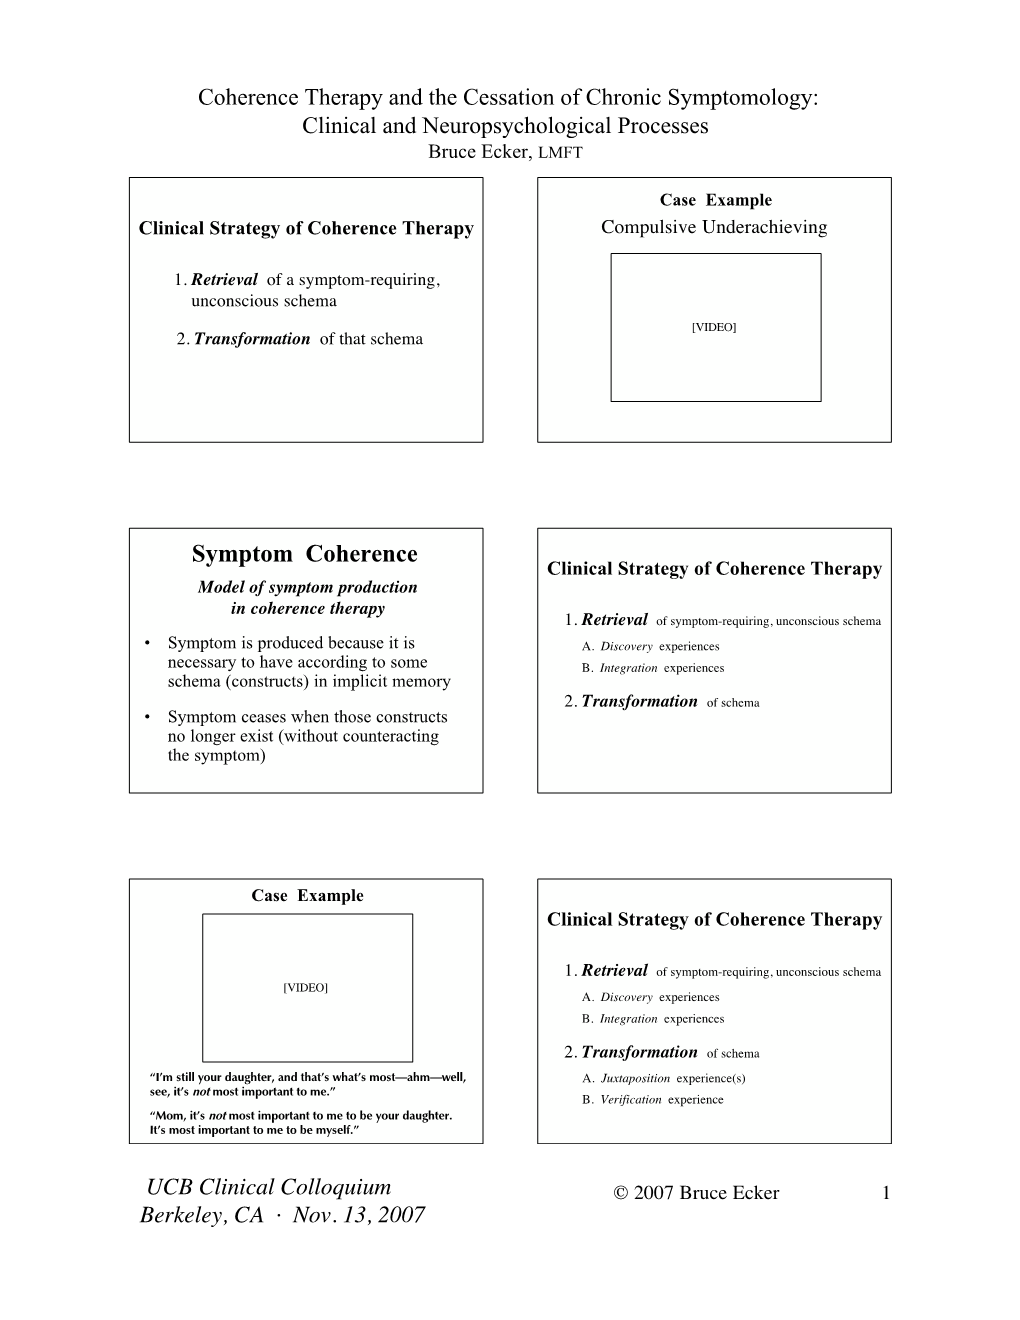 Symptom Coherence Clinical Strategy of Coherence Therapy Model of Symptom Production in Coherence Therapy 1